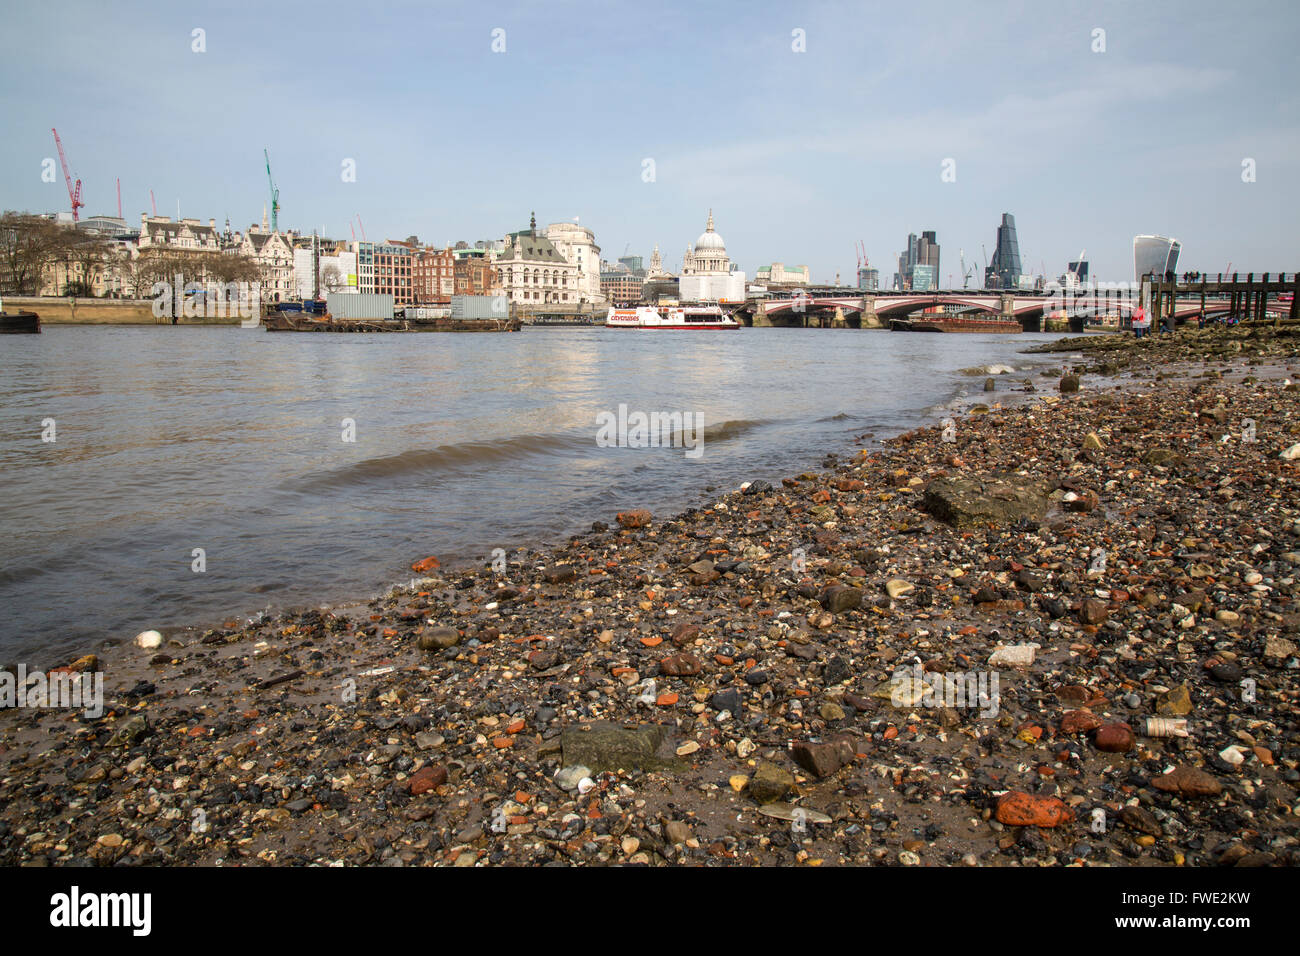 The River Thames foreshore in central London, showing debris from many centuries of trade up and down the river. Stock Photo